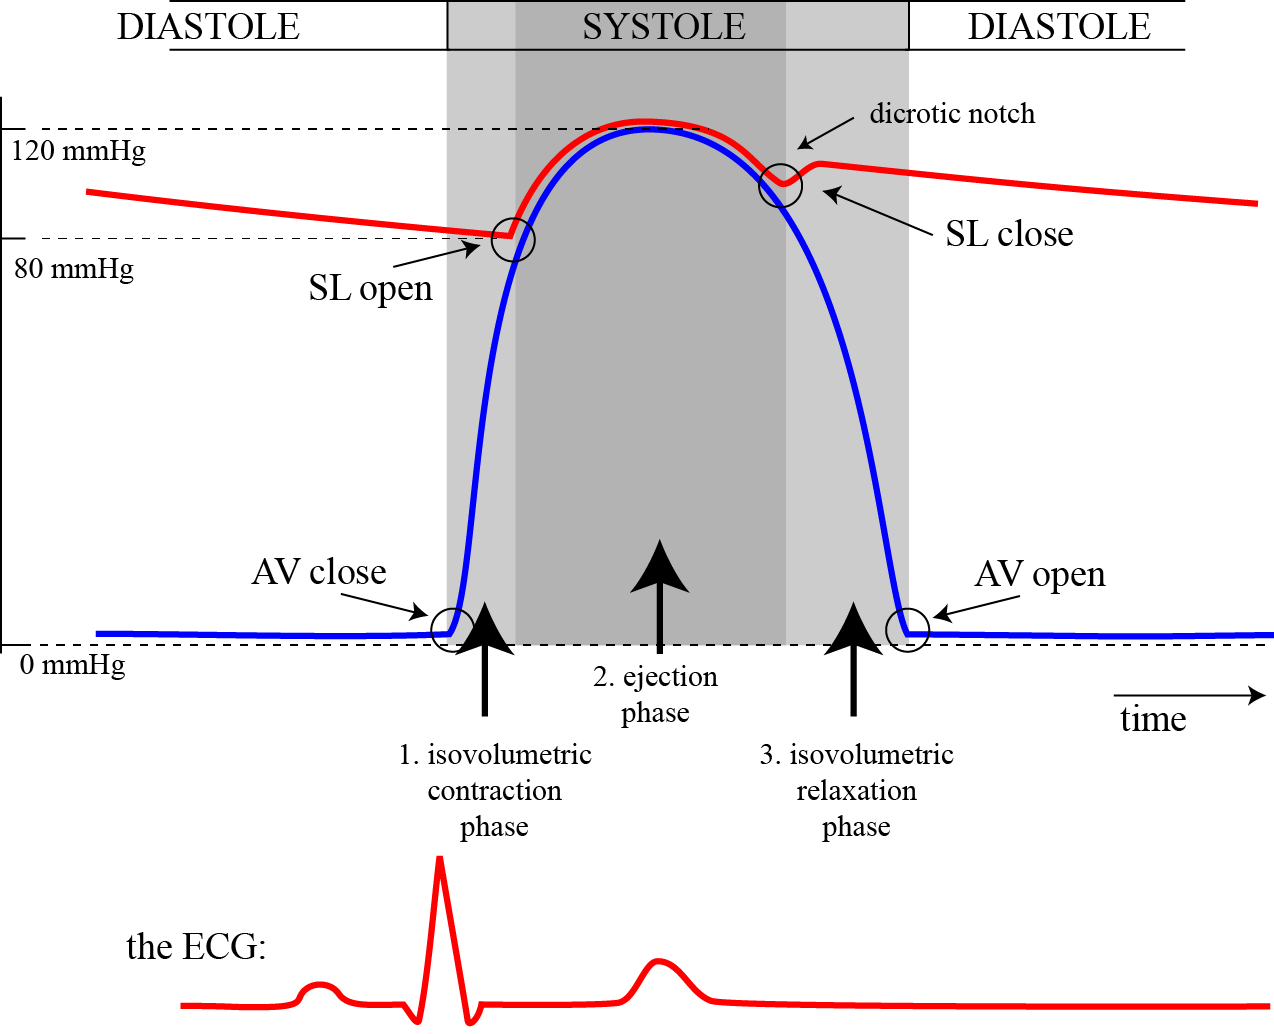 Ventricular Pressures - systole